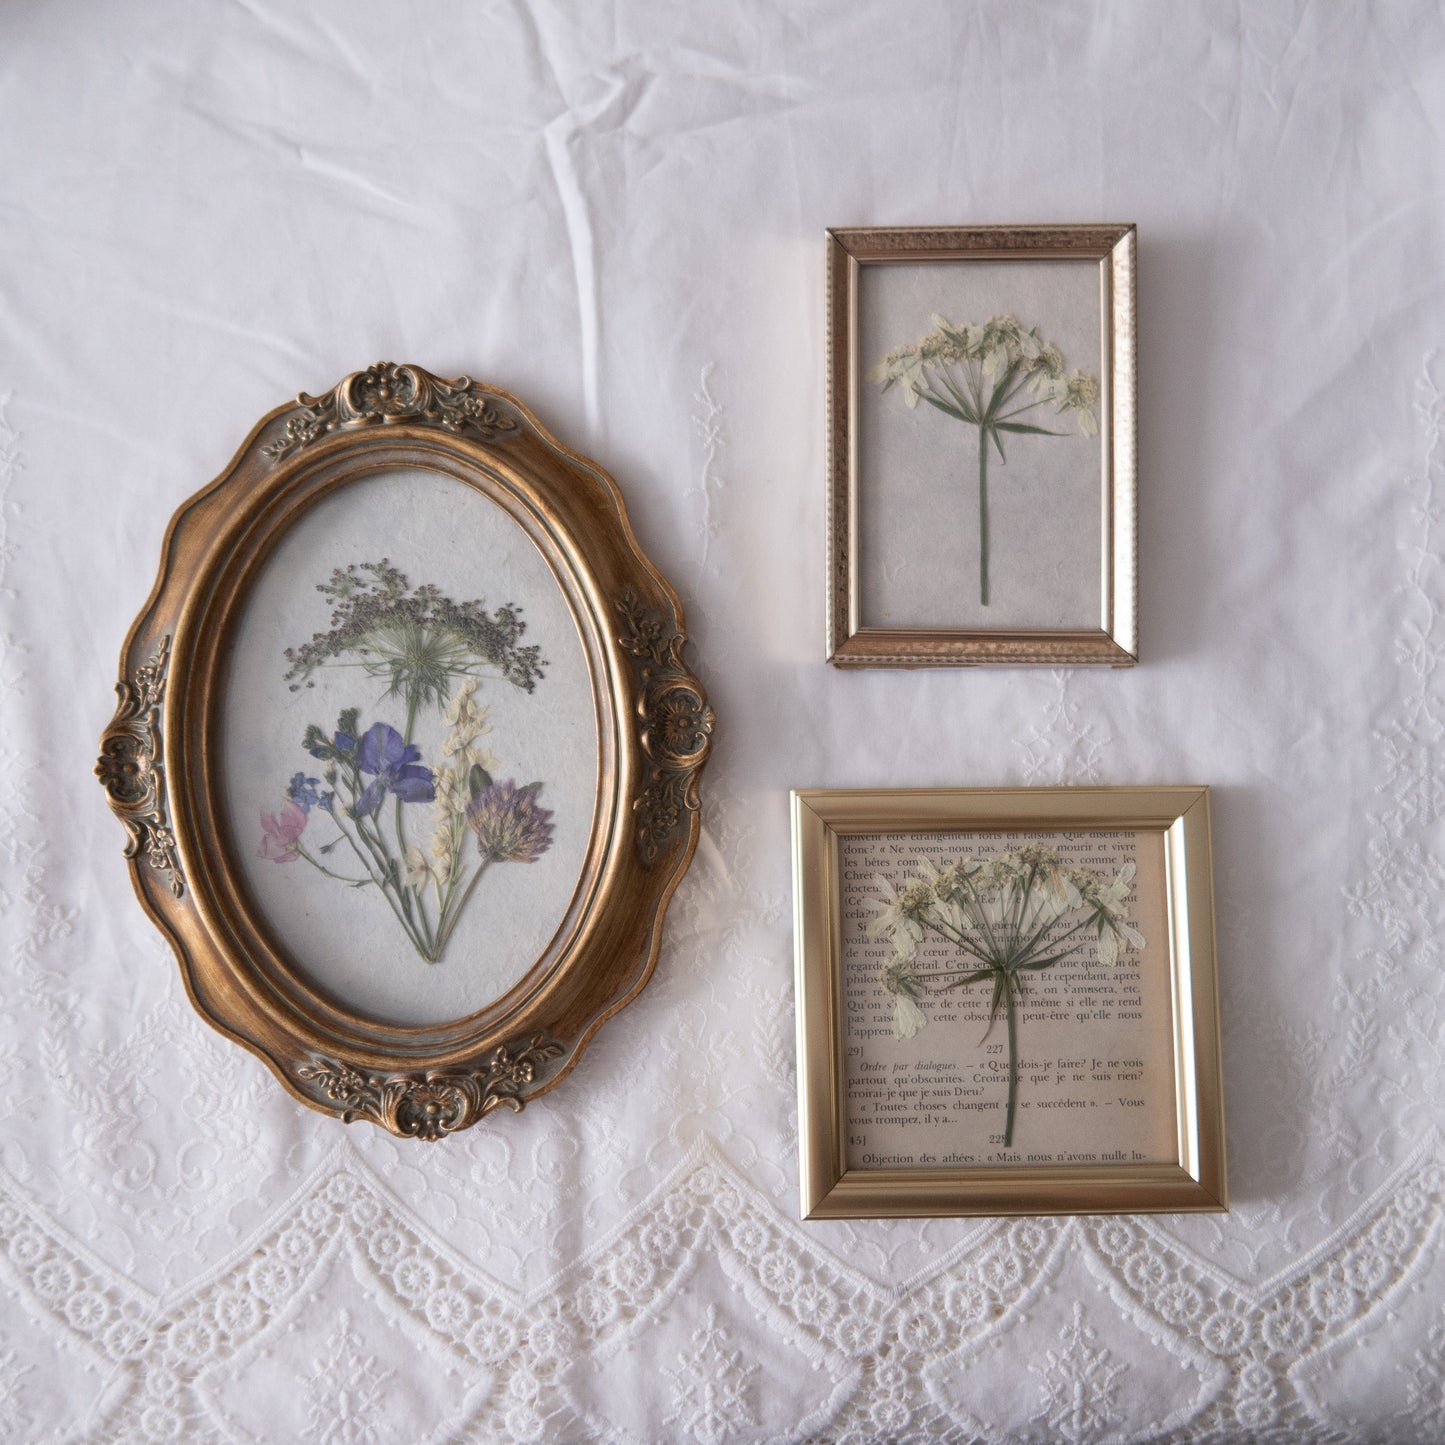 The Little Women Oval frame with pressed wildflowers